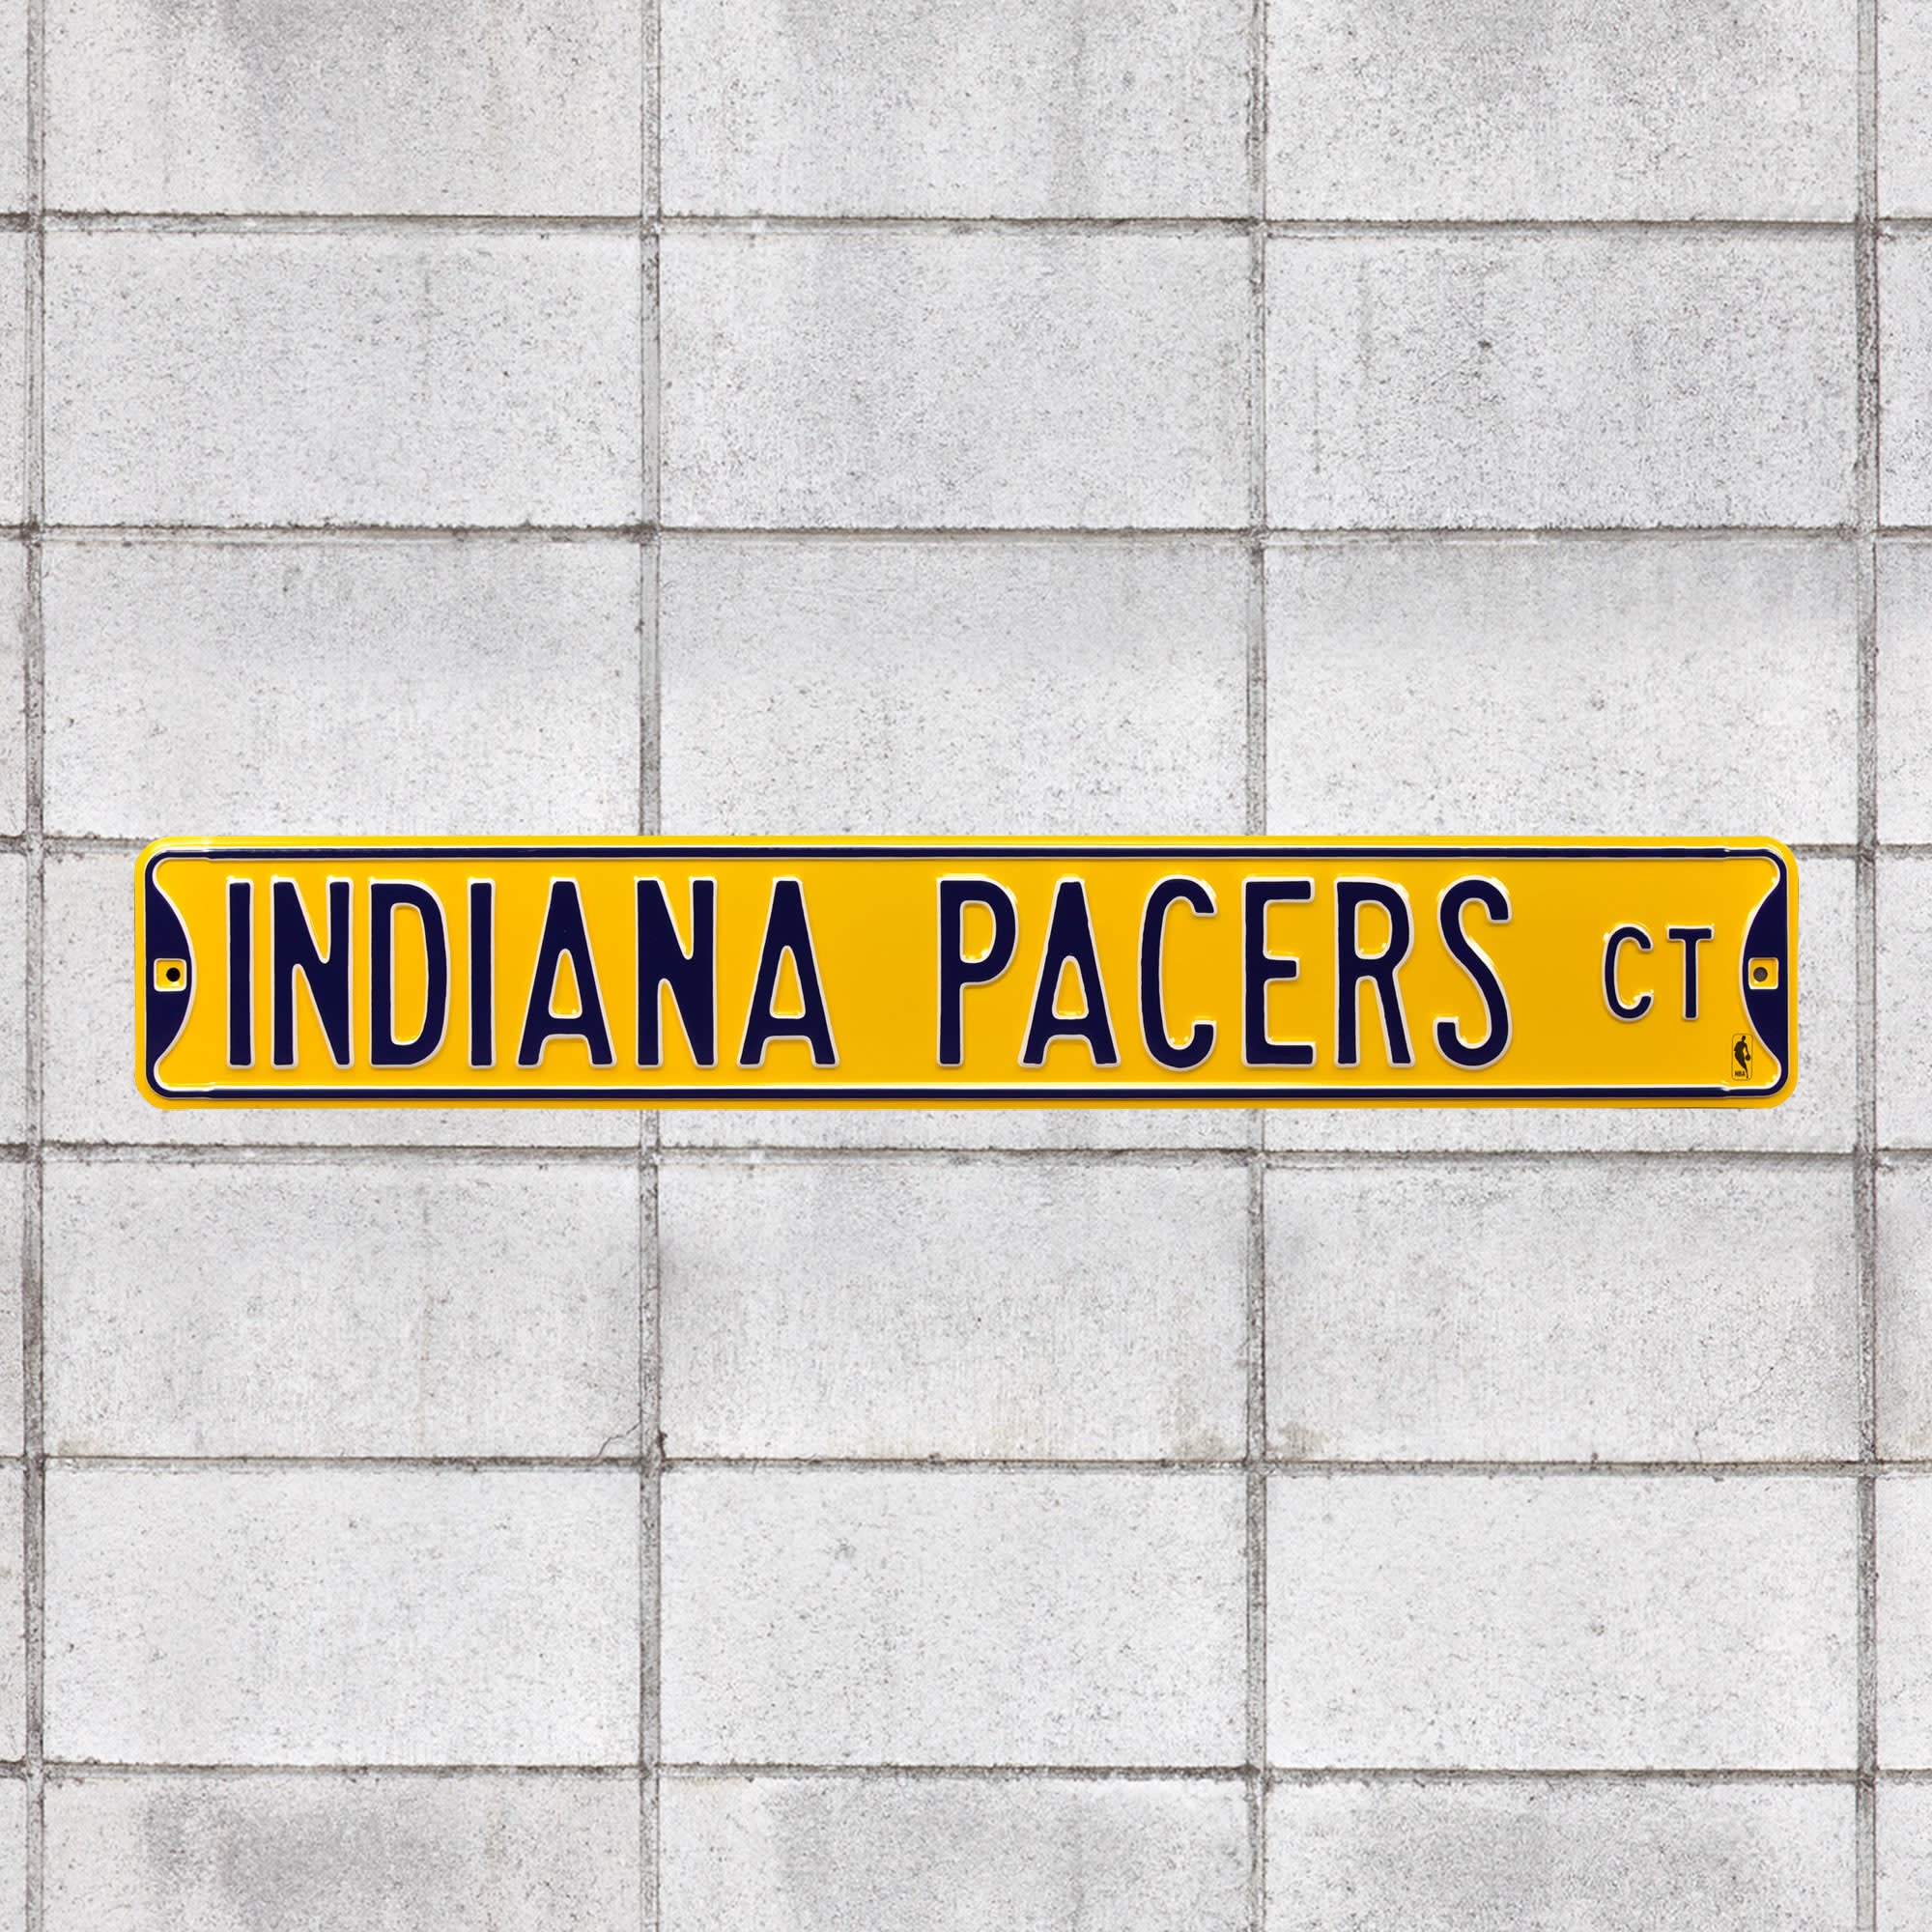 Indiana Pacers: Court - Officially Licensed NBA Metal Street Sign 36.0"W x 6.0"H by Fathead | 100% Steel